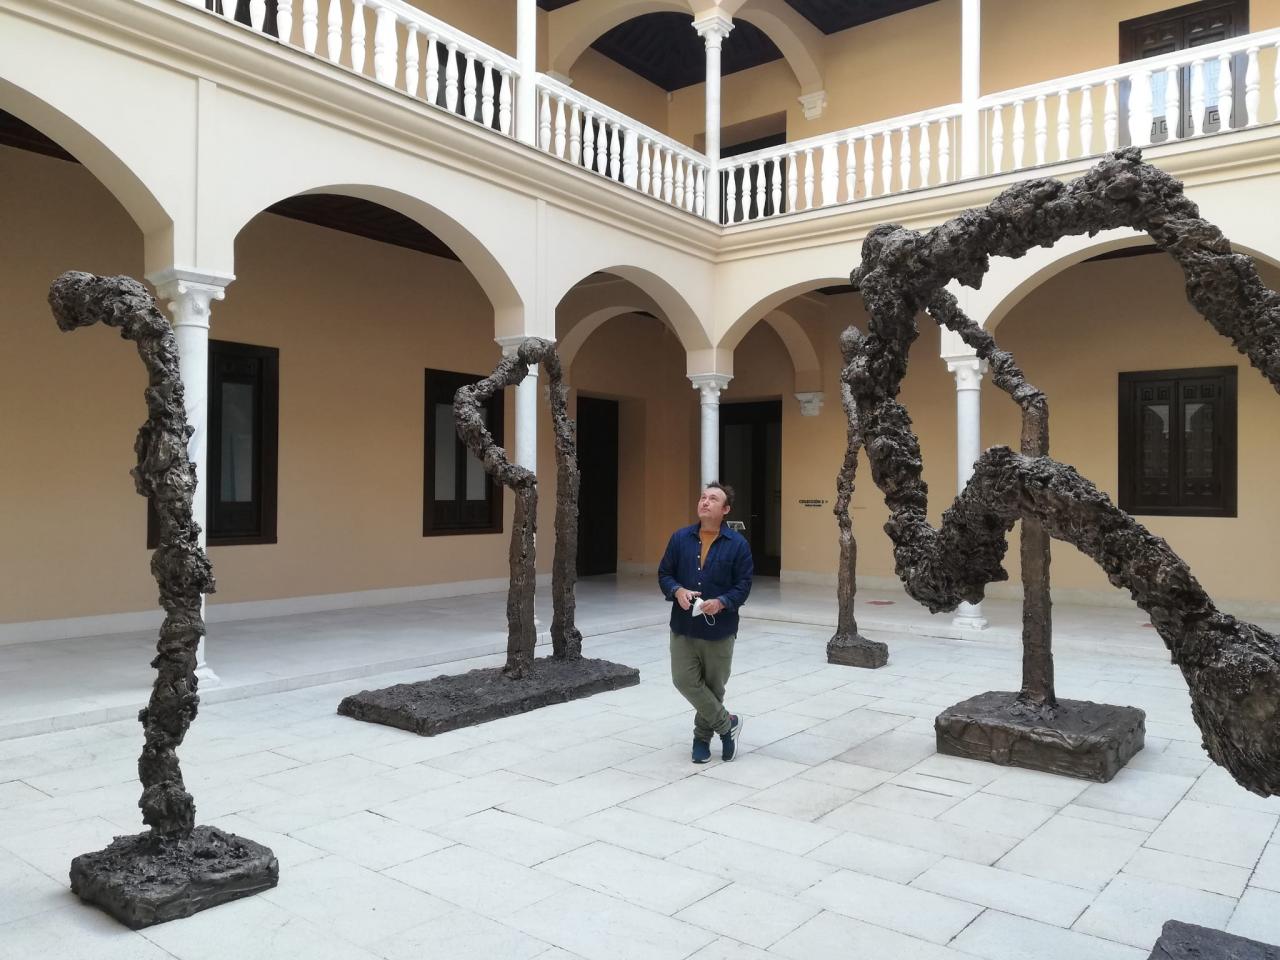 The work of Miquel Barceló at the Museum of Palma